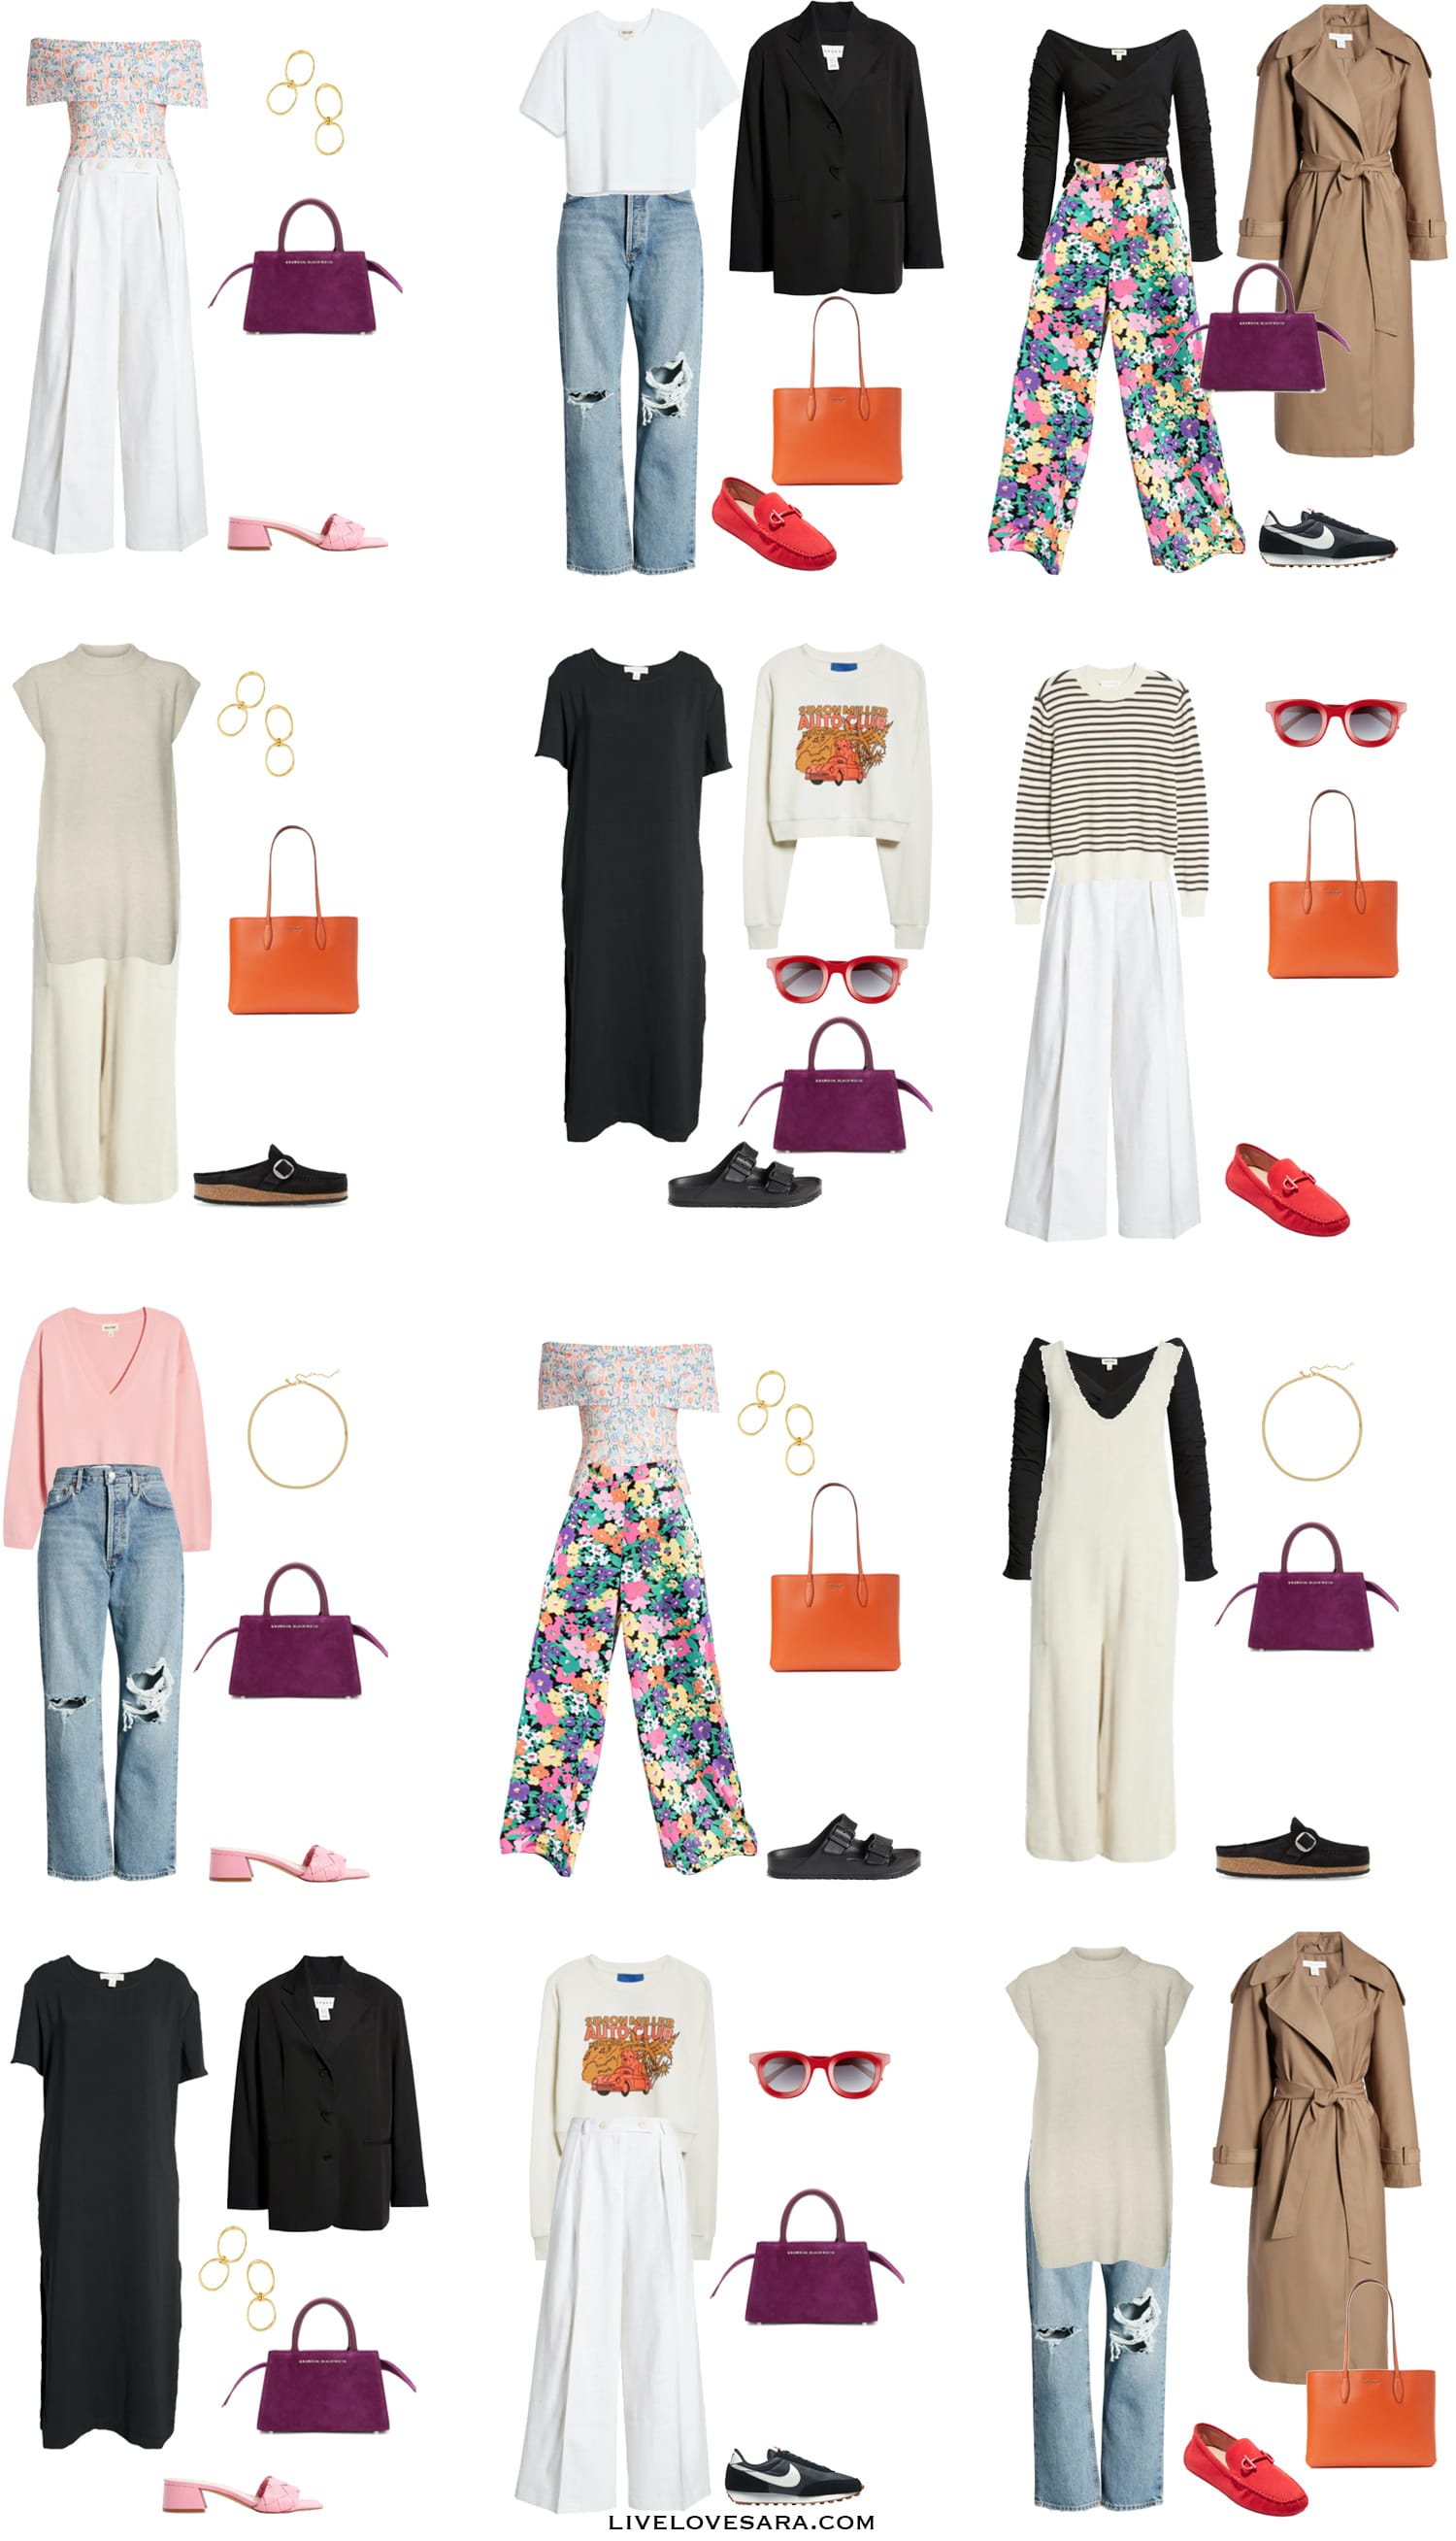 A white background with outfits 13-24 built from a transitional spring to summer capsule wardrobe 2022 from Nordstrom Canada.